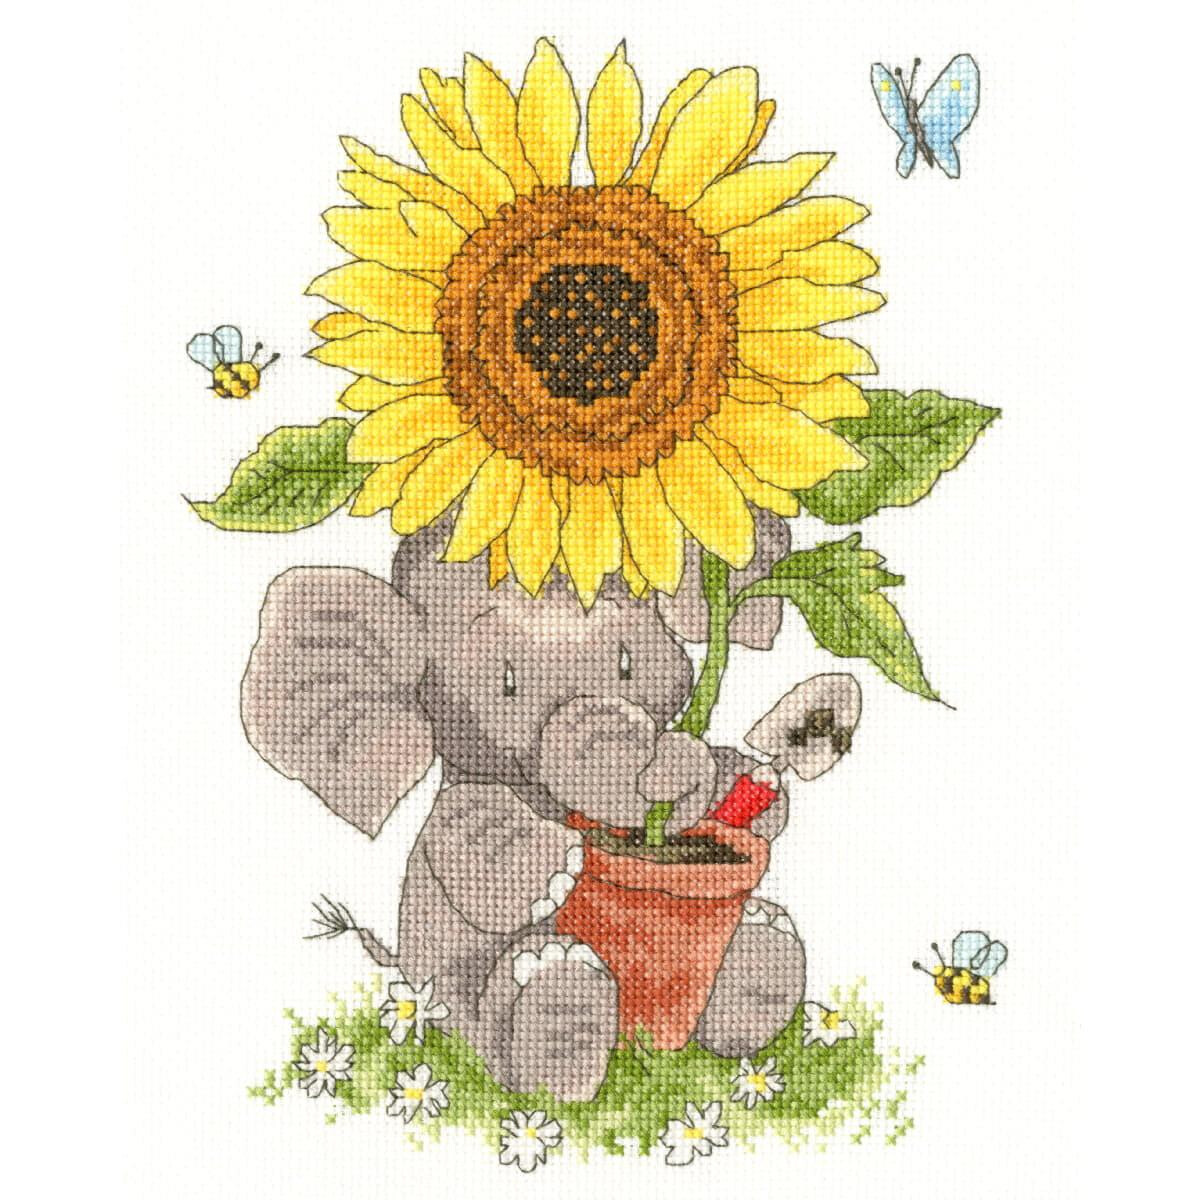 A cute illustration of a sitting baby elephant with a...